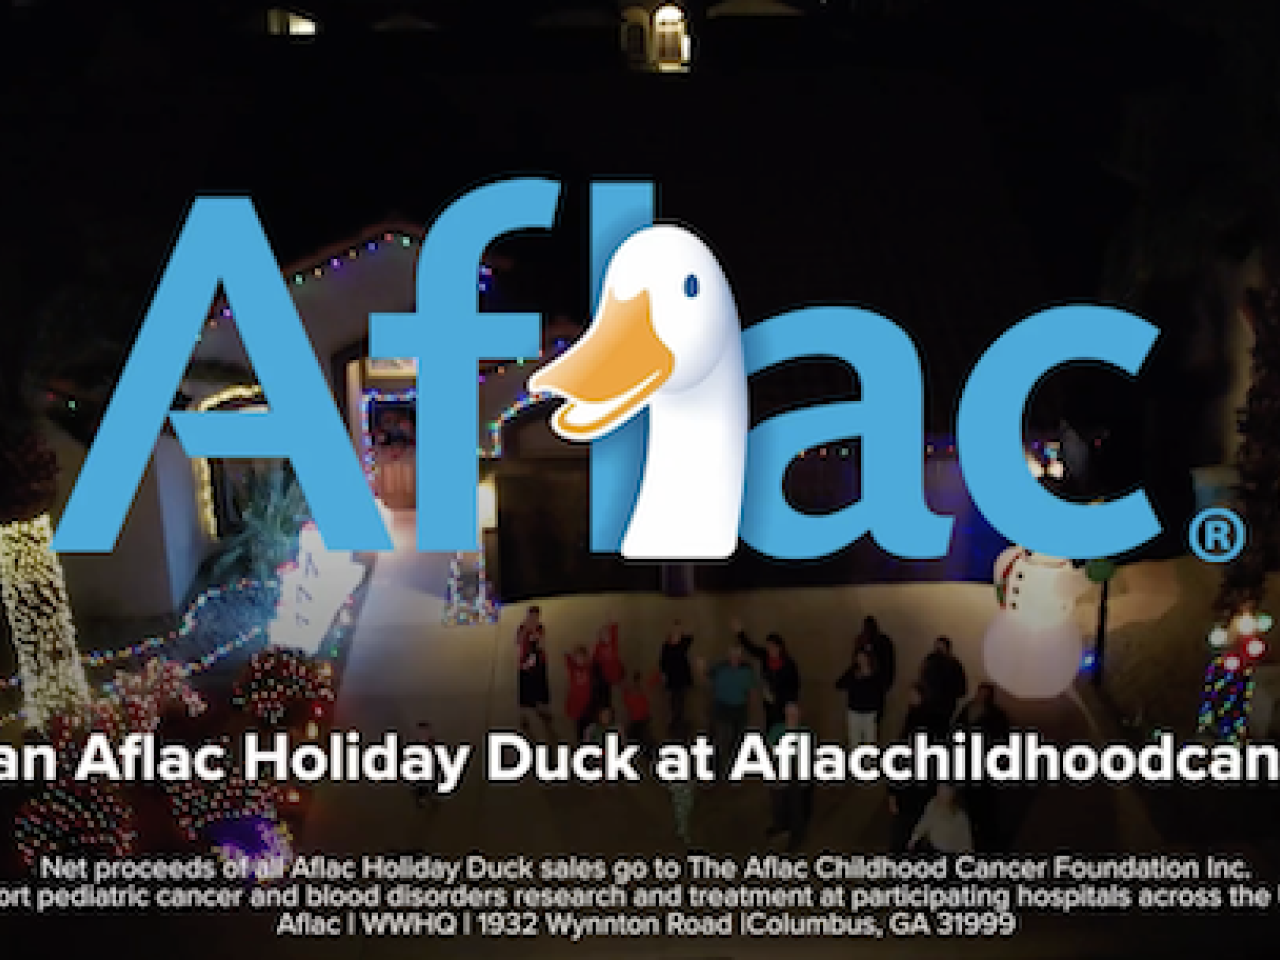 The Aflac Holiday Duck.